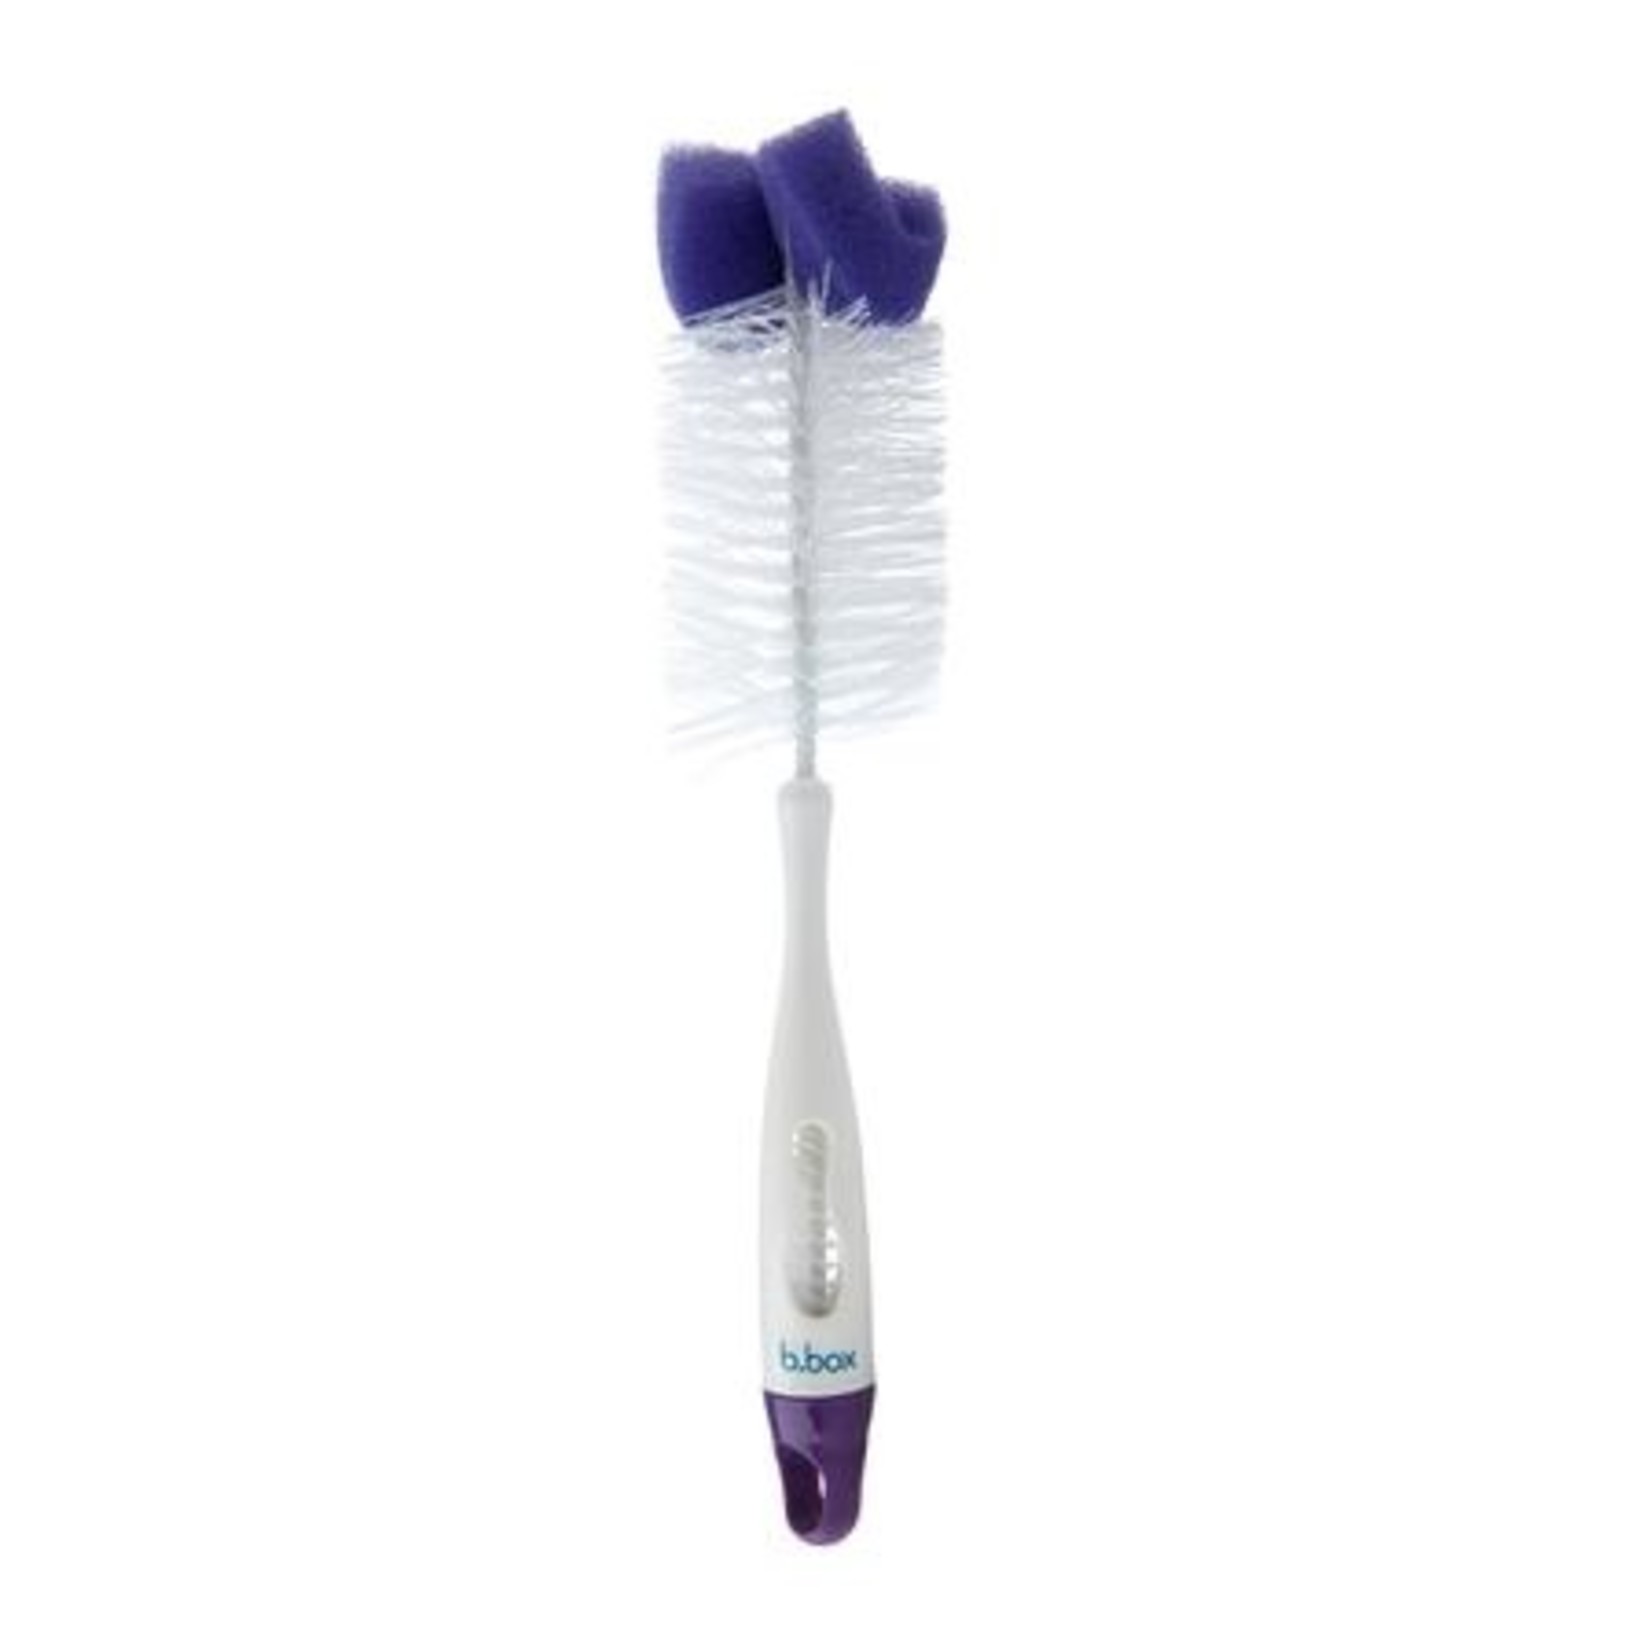 B.Box 2 in 1 brush and teat cleaner